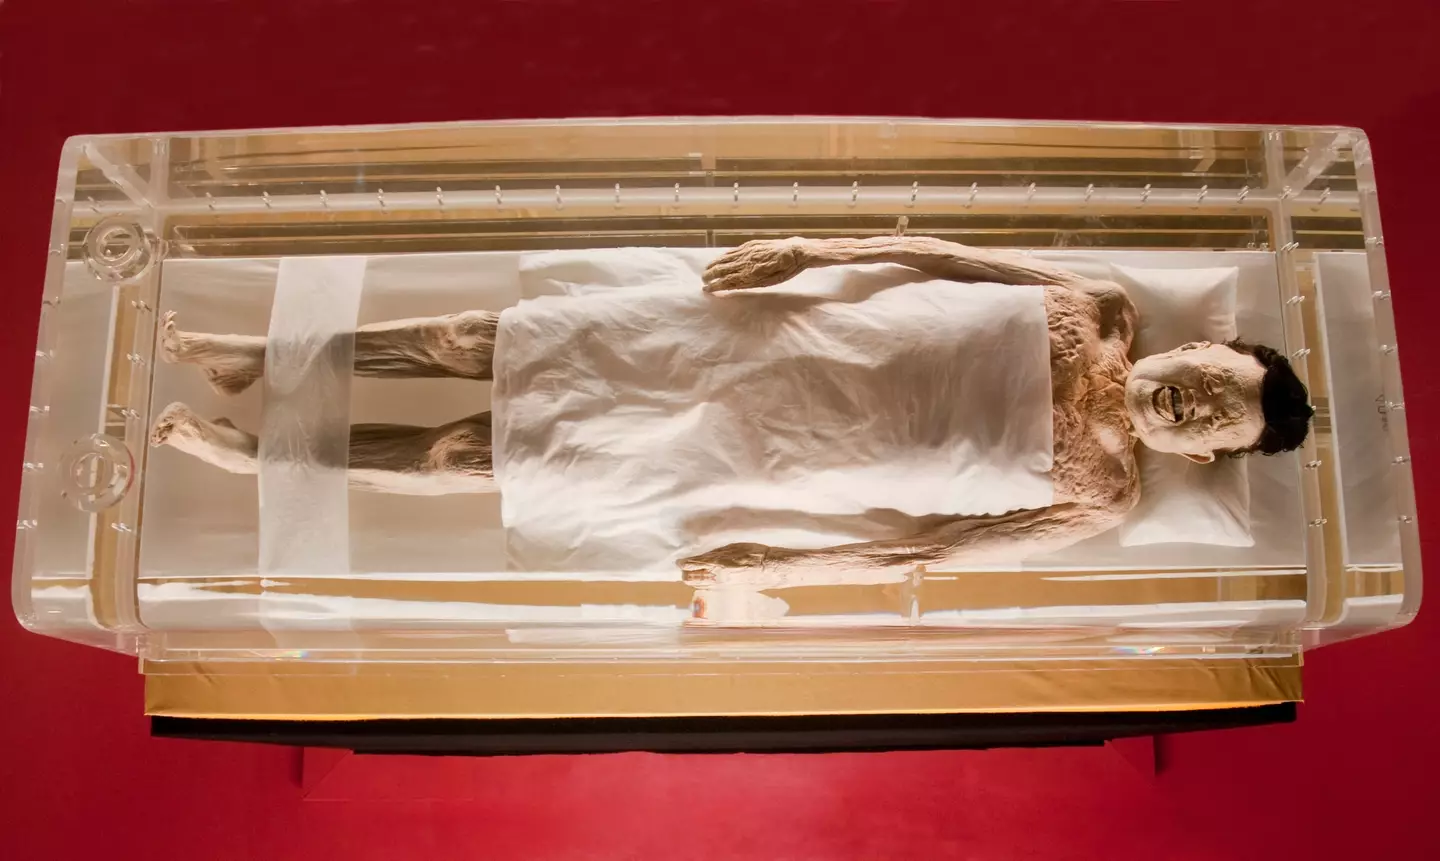 The mummy is 2,000 years old.